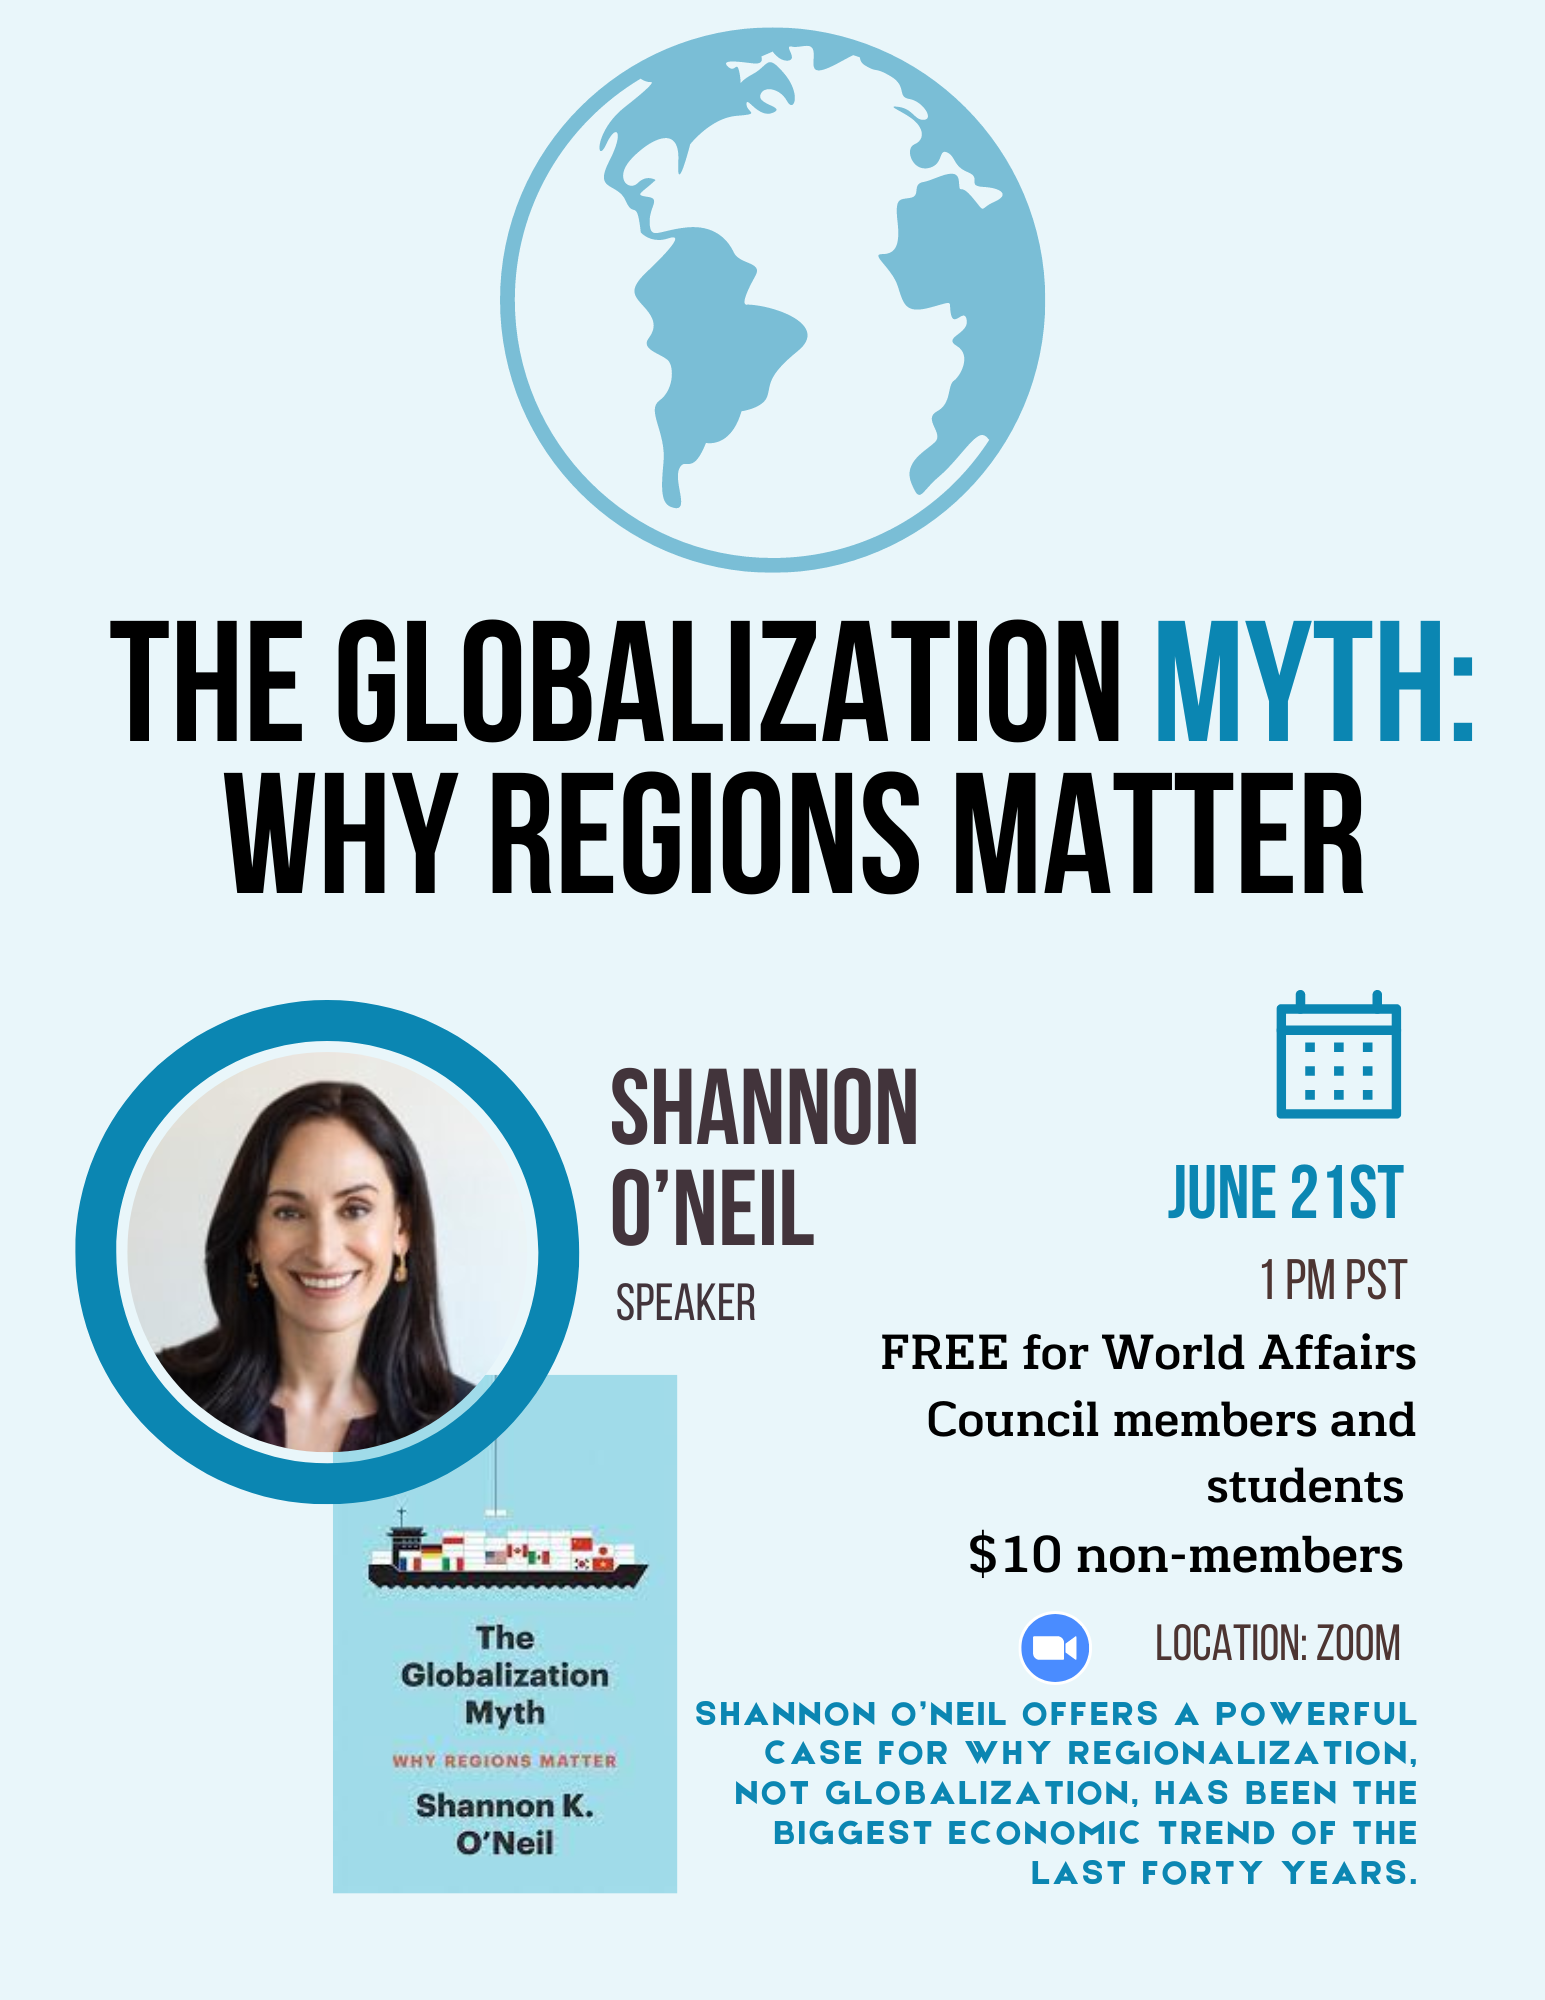 The Globalization Myth: Why Regions Matter with Shannon O'Neil